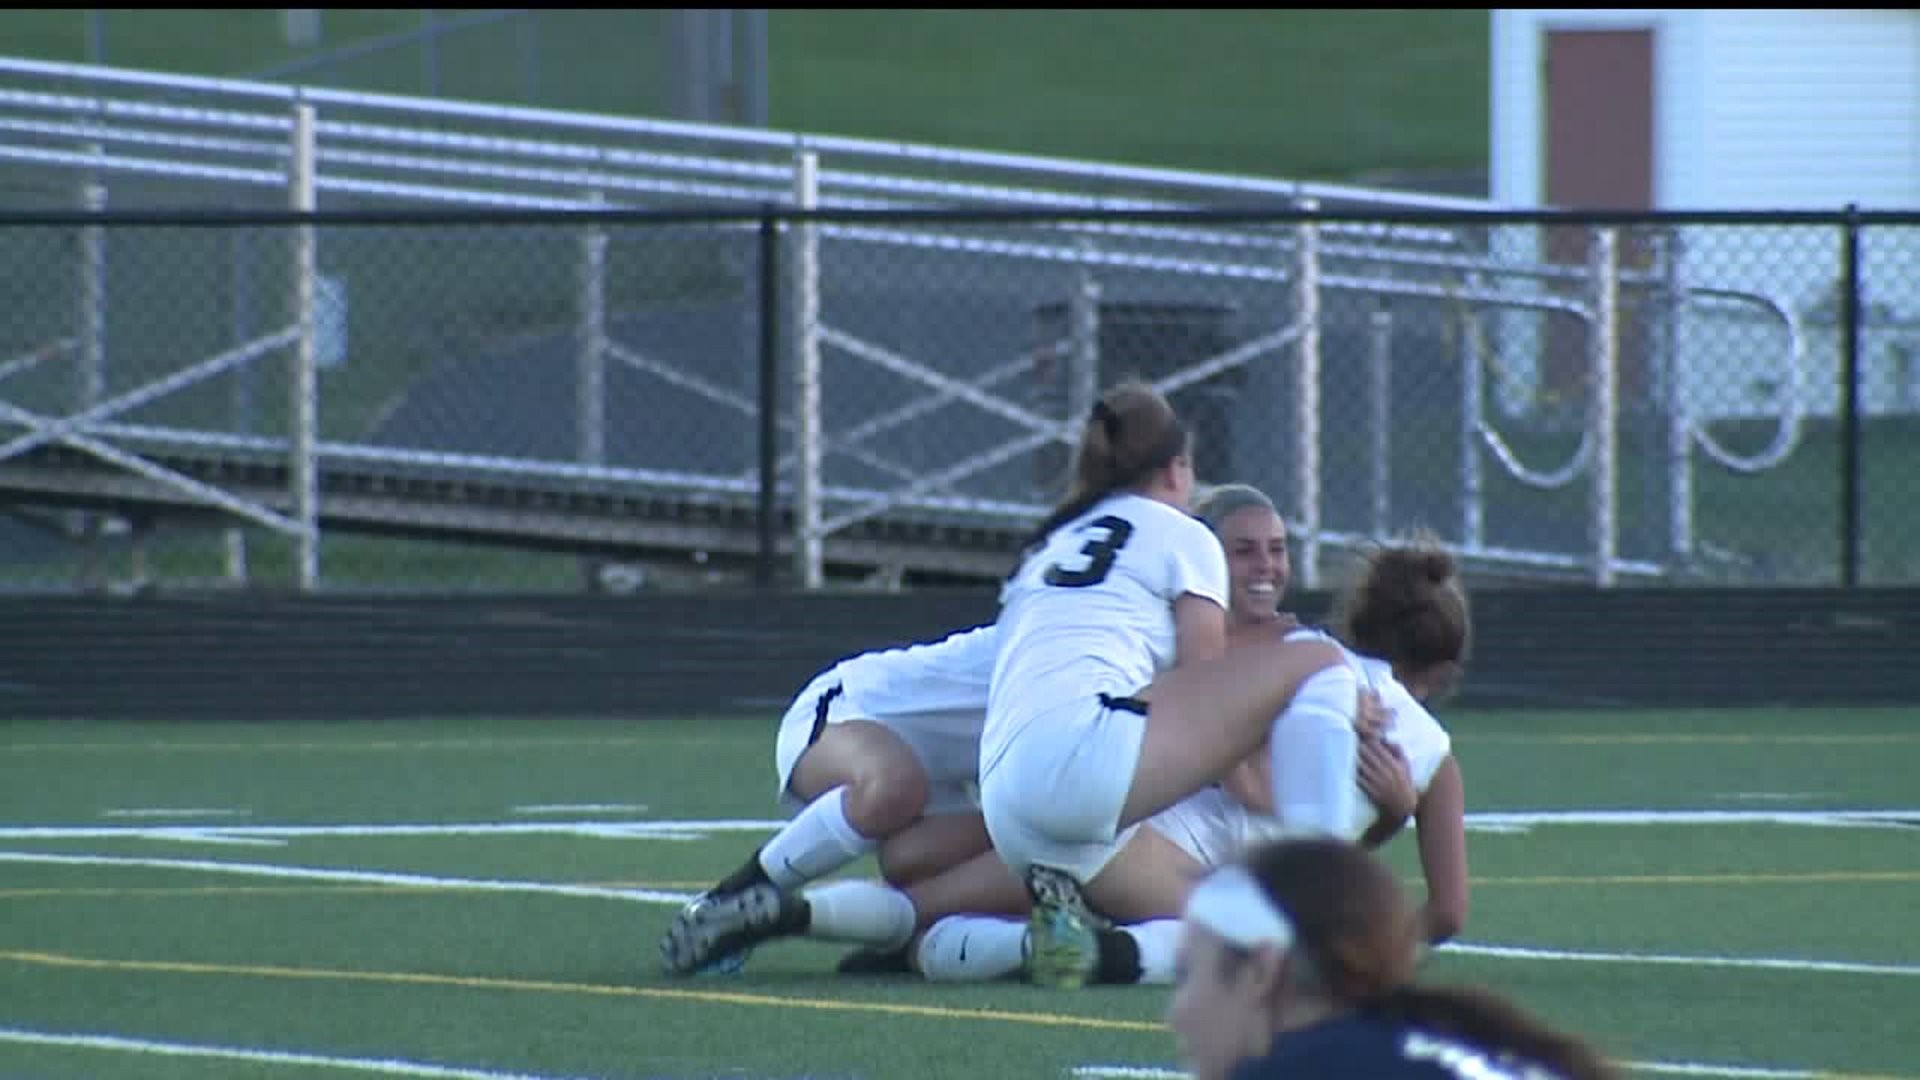 Bettendorf bests PV in 99th minute to earn State berth